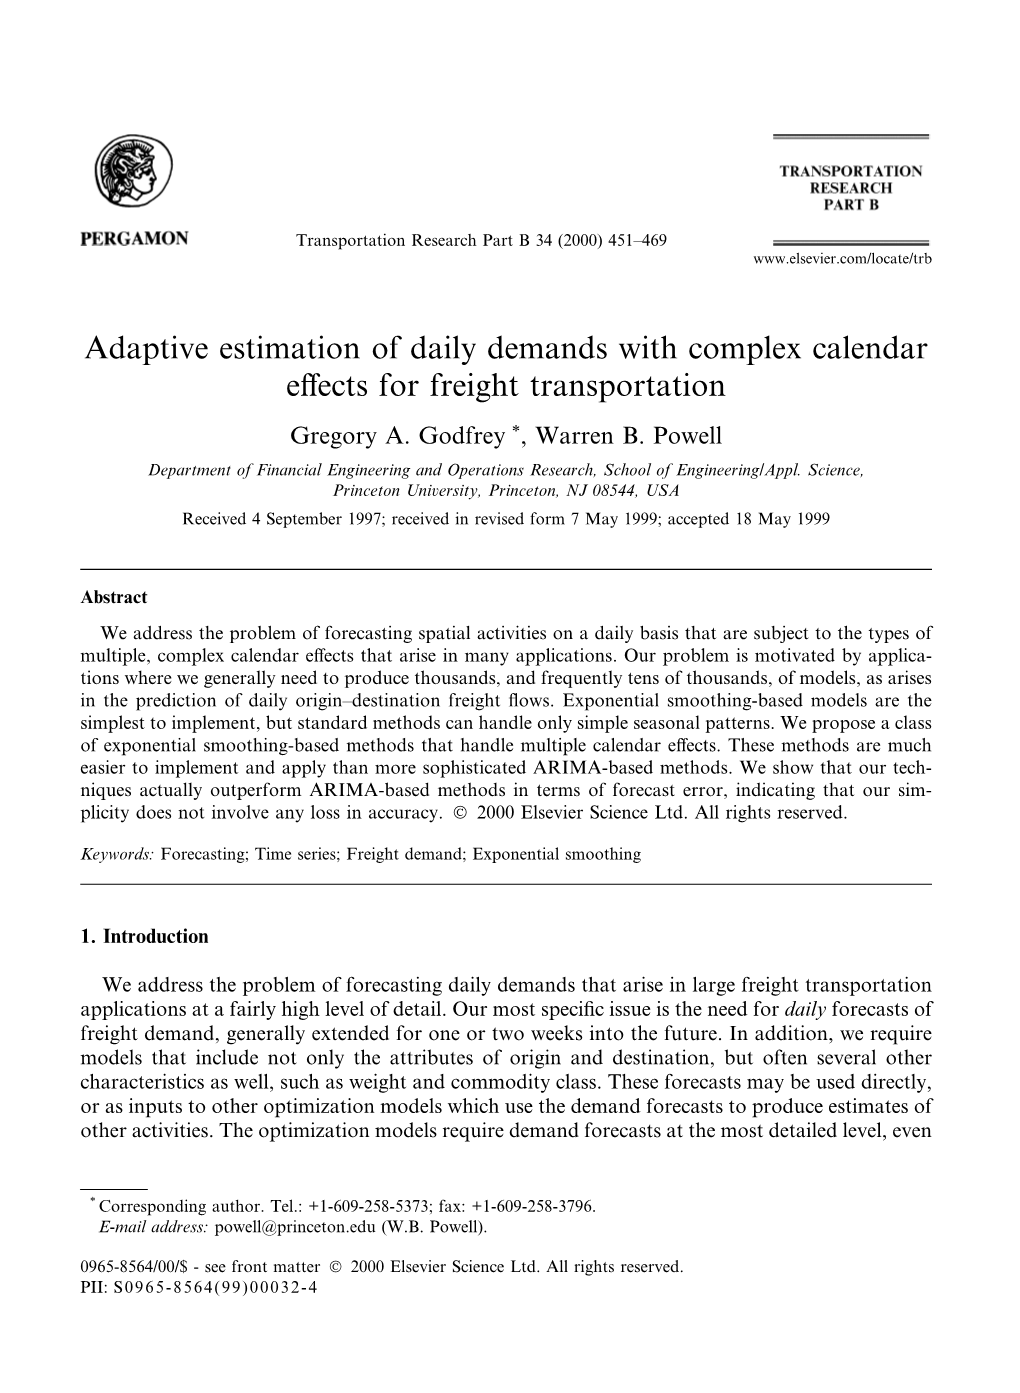 Adaptive Estimation of Daily Demands with Complex Calendar Effects For